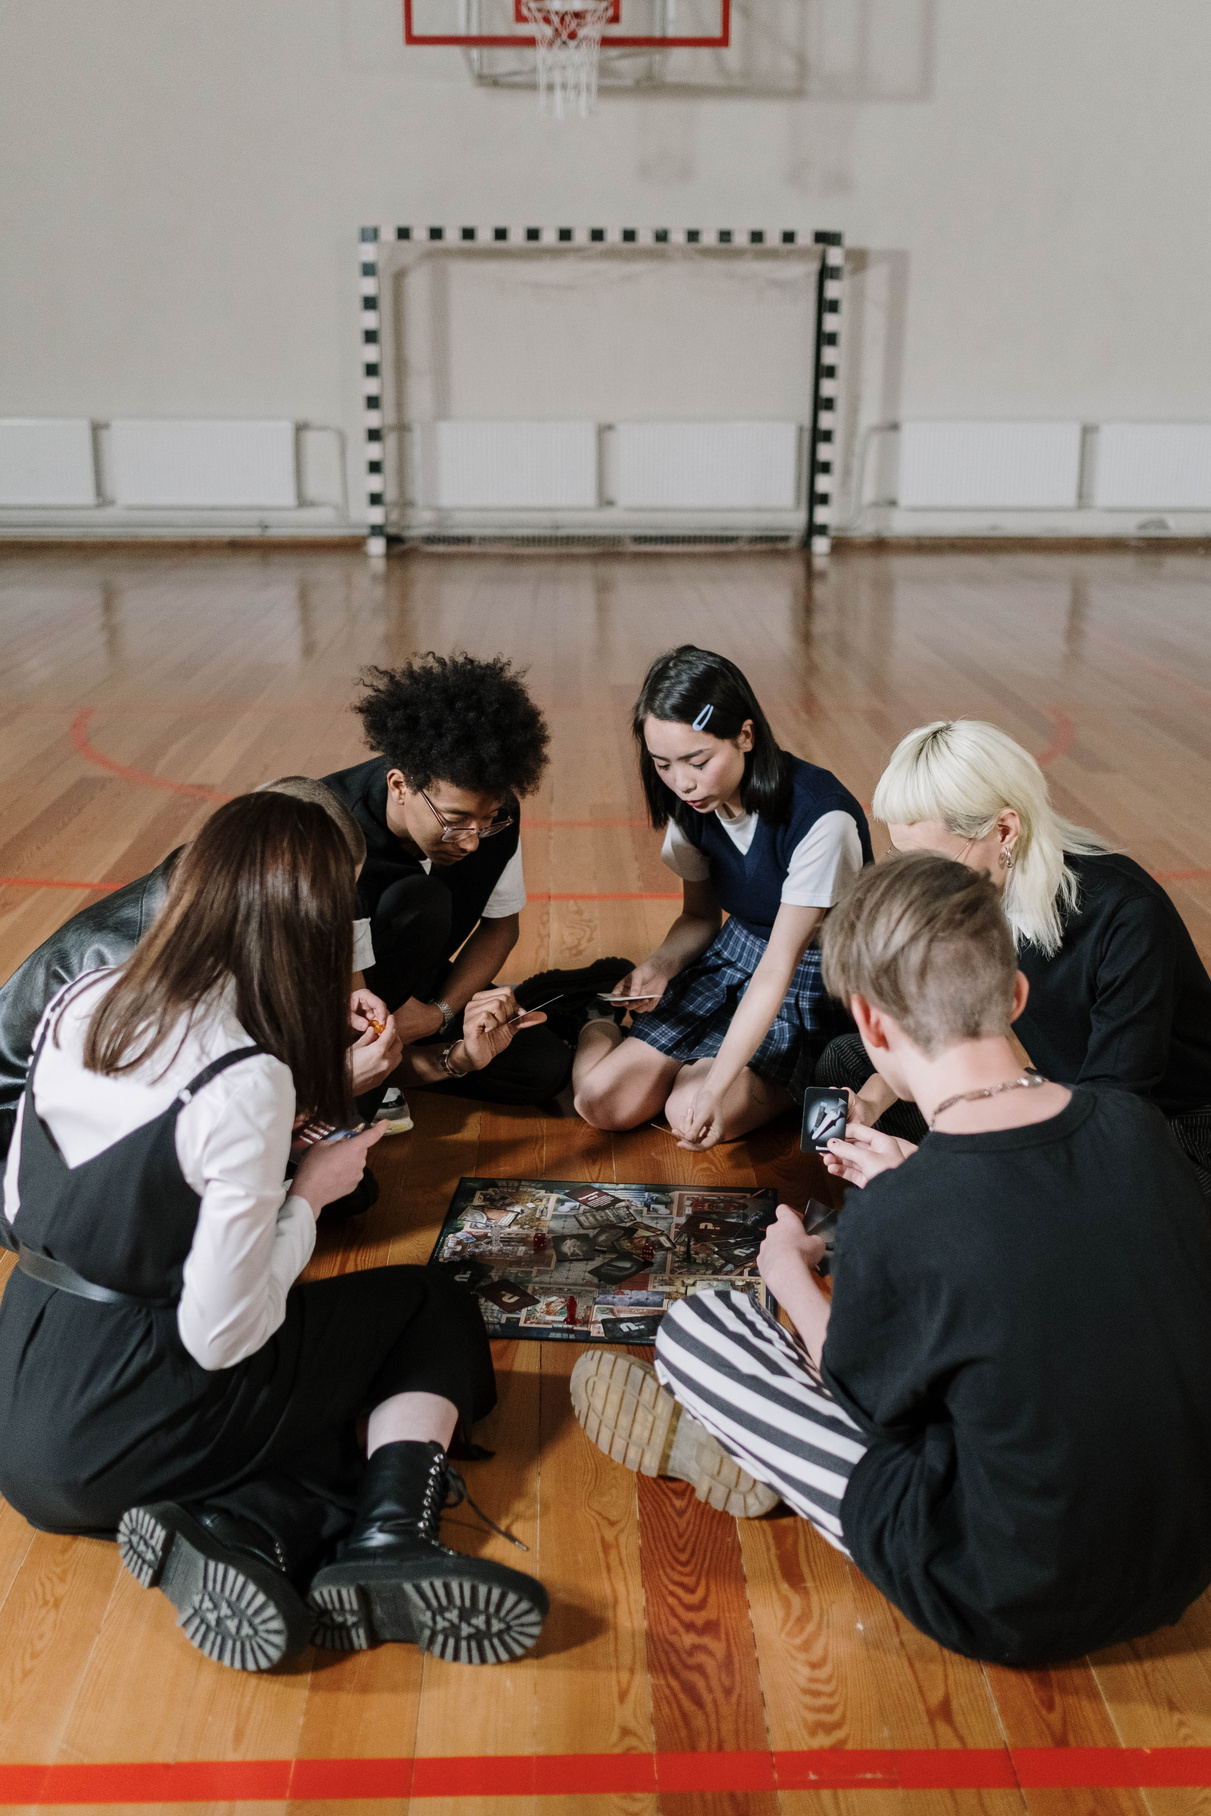 A Group of People Playing a Board Game